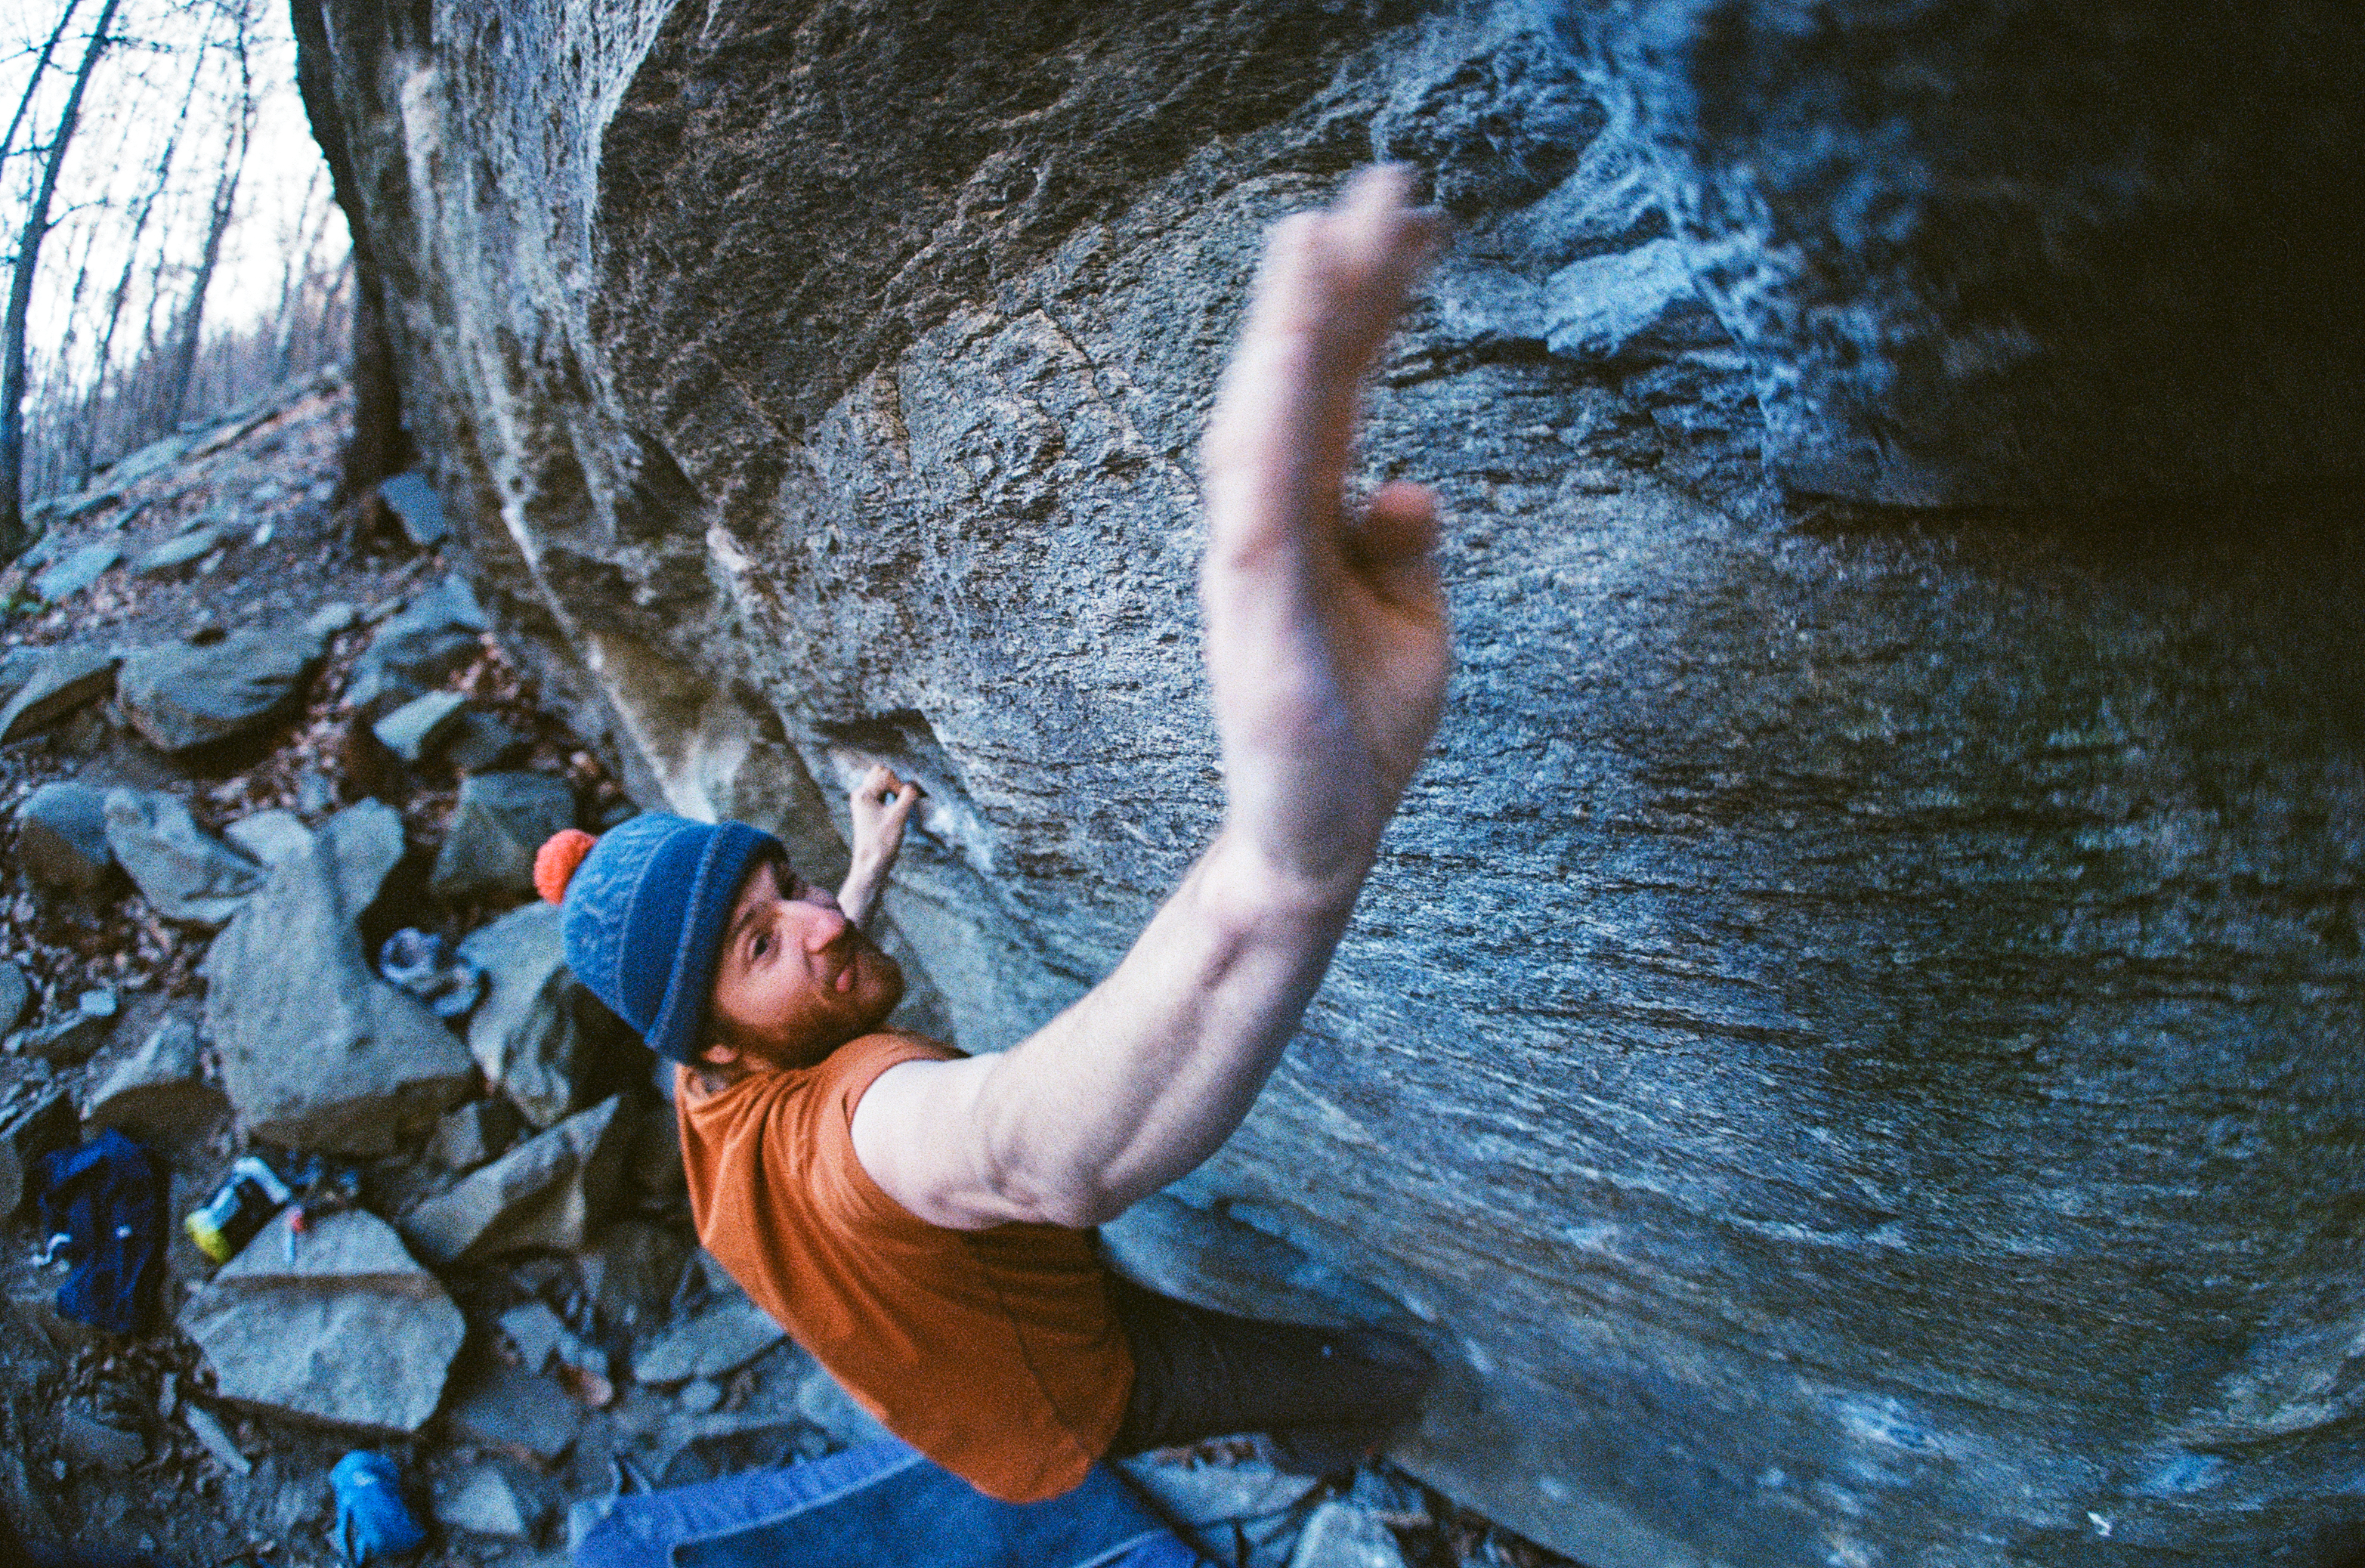 Tom in a 7a+ boulder
	   in the Tessin, Switzerland over New Years 2018/19 (Leica R9, Film:
	   Slide ISO 100)